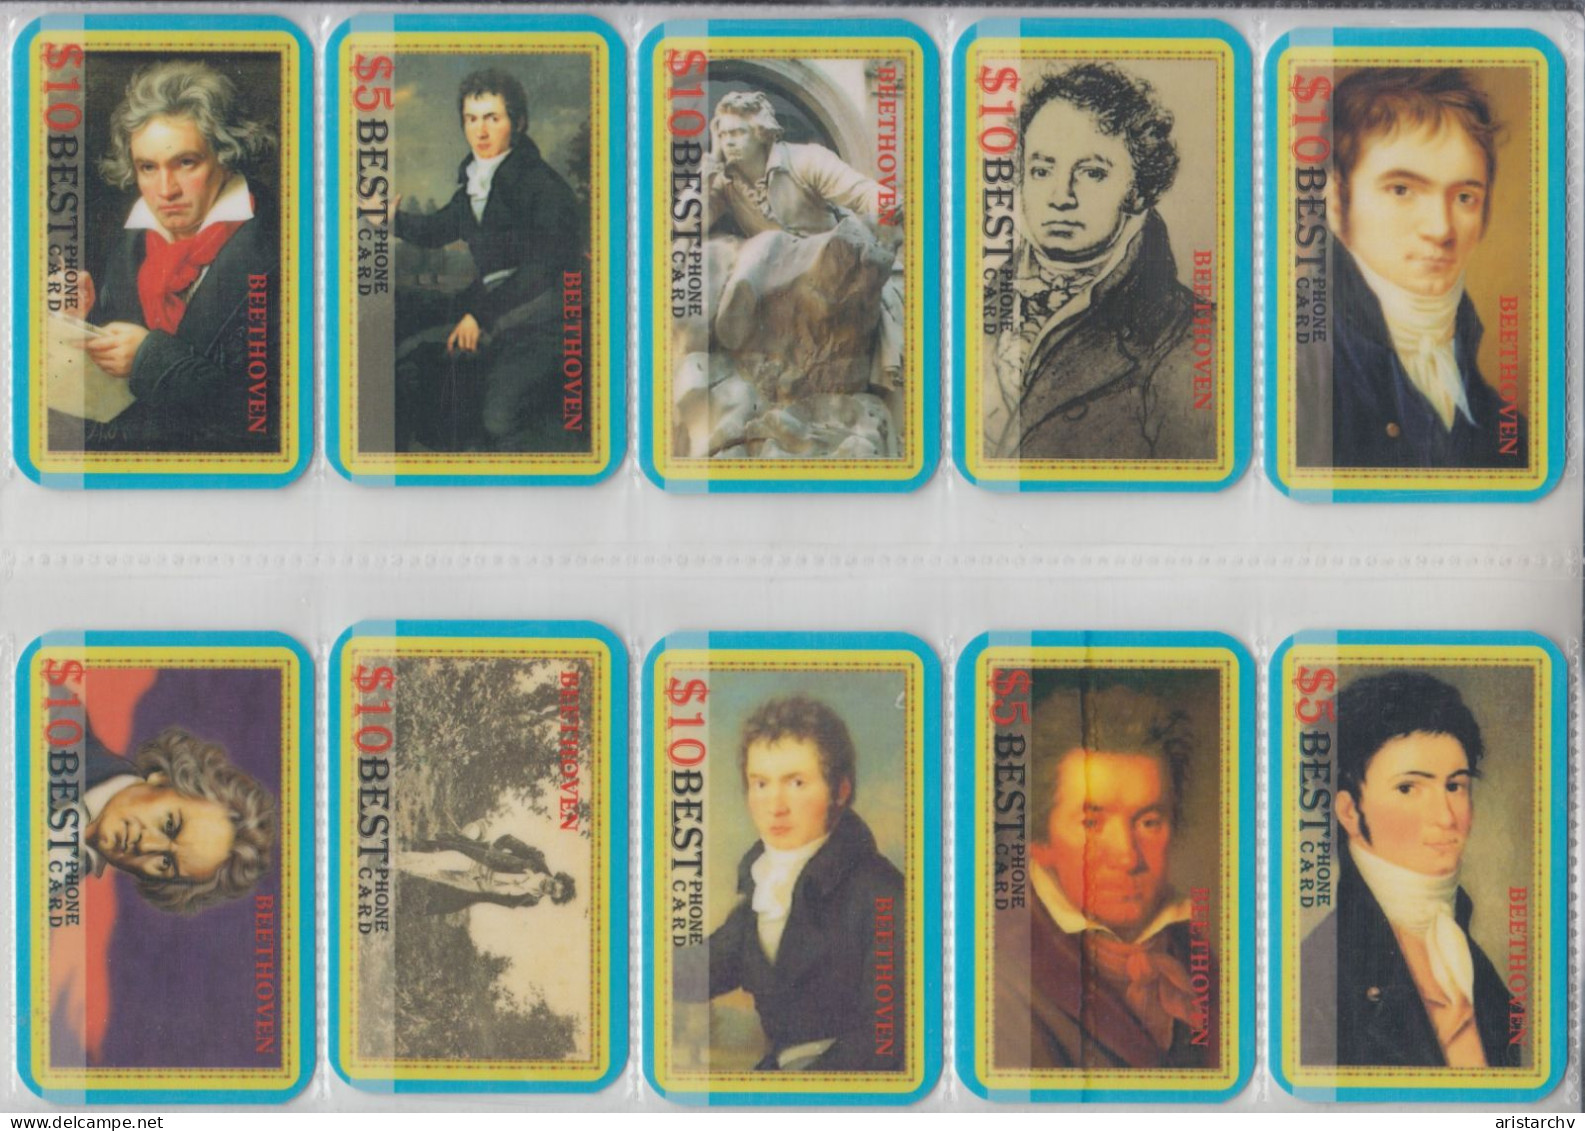 USA CLASSIC MUSIC COMPOSER LUDWIG VAN BEETHOVEN SET OF 10 CARDS - Musik